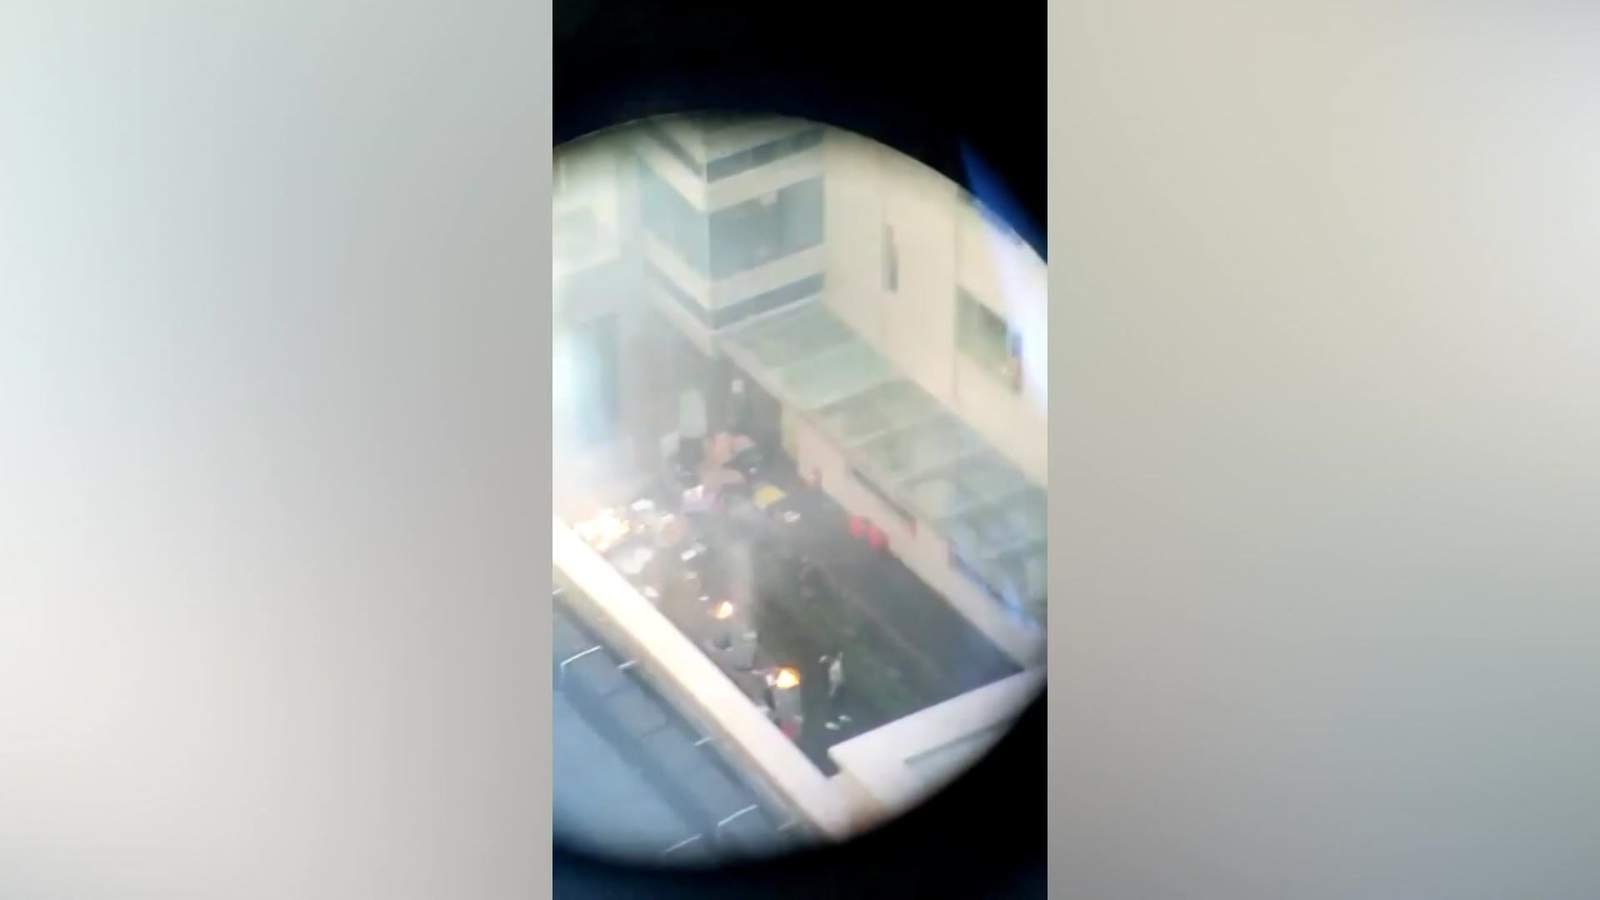 Video shows flames, activity in courtyard of Consulate General of China in Houston